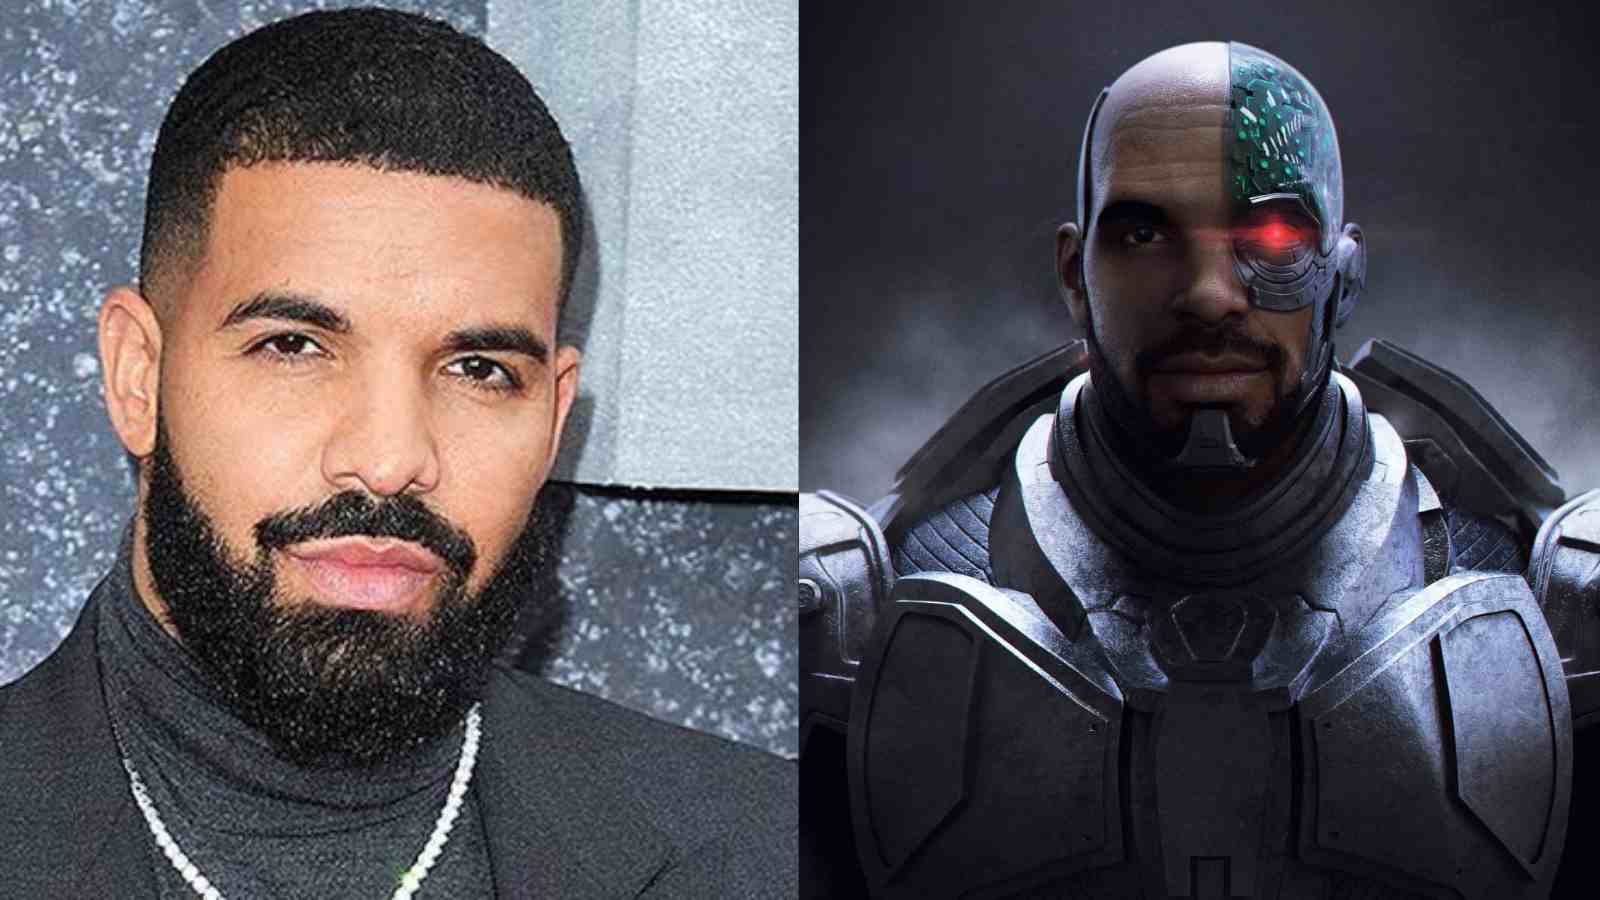 Drake was to be in Cyborg